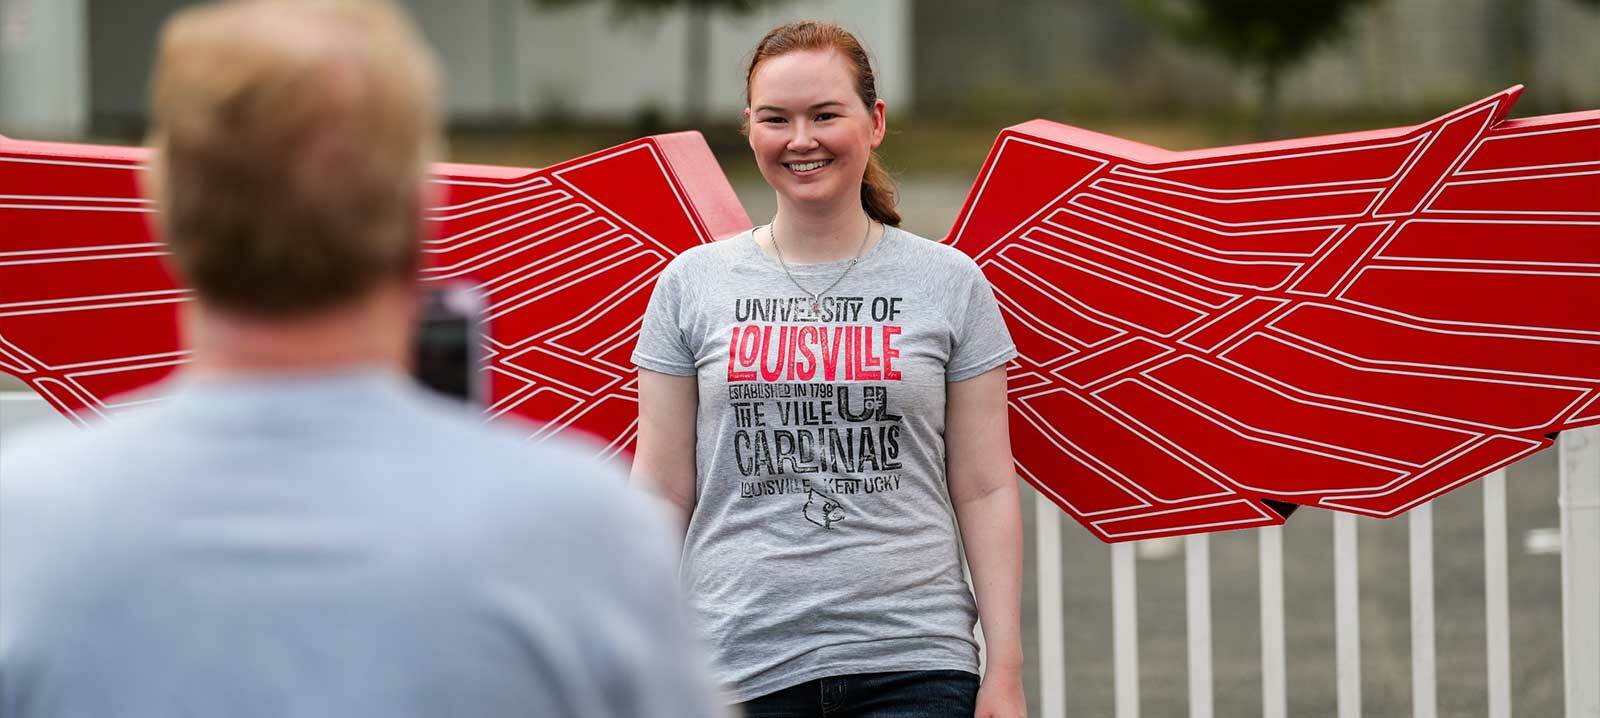 A custom foam3d sculpture of wings for a photo prop at the University of Lousiville